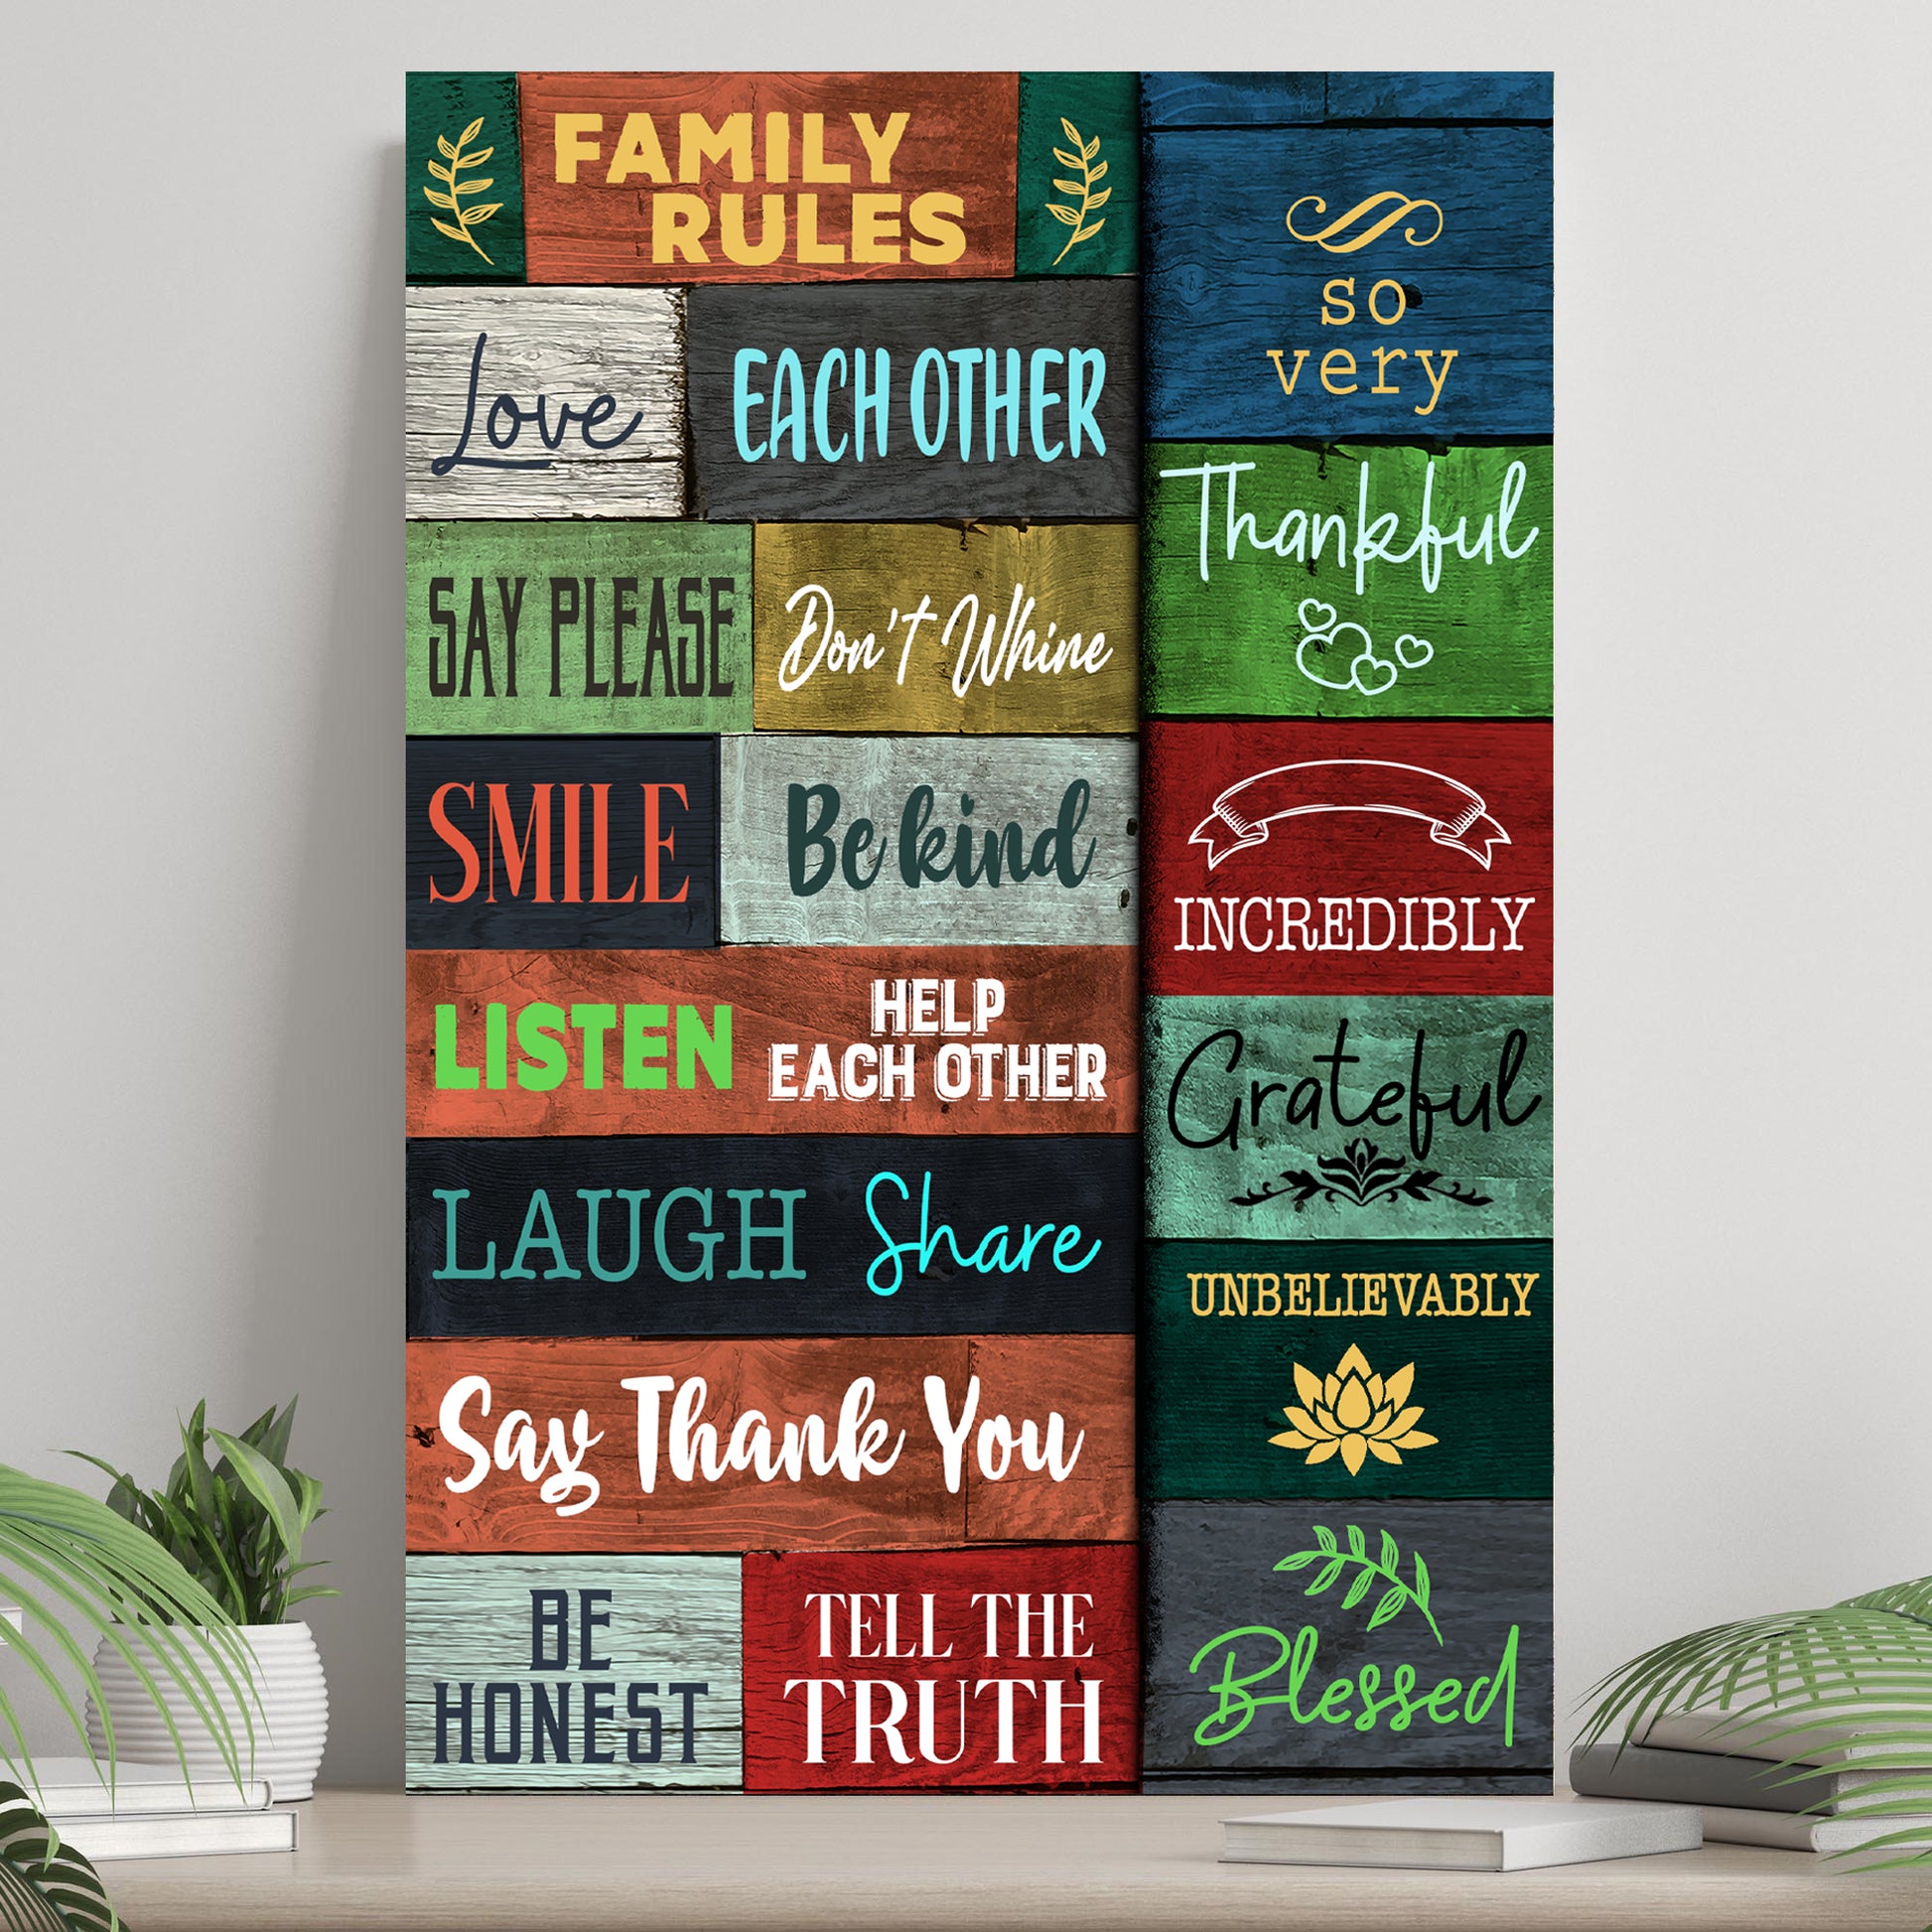 So Very Thankful, Incredibly Grateful Family Rules - Image by Tailored Canvases